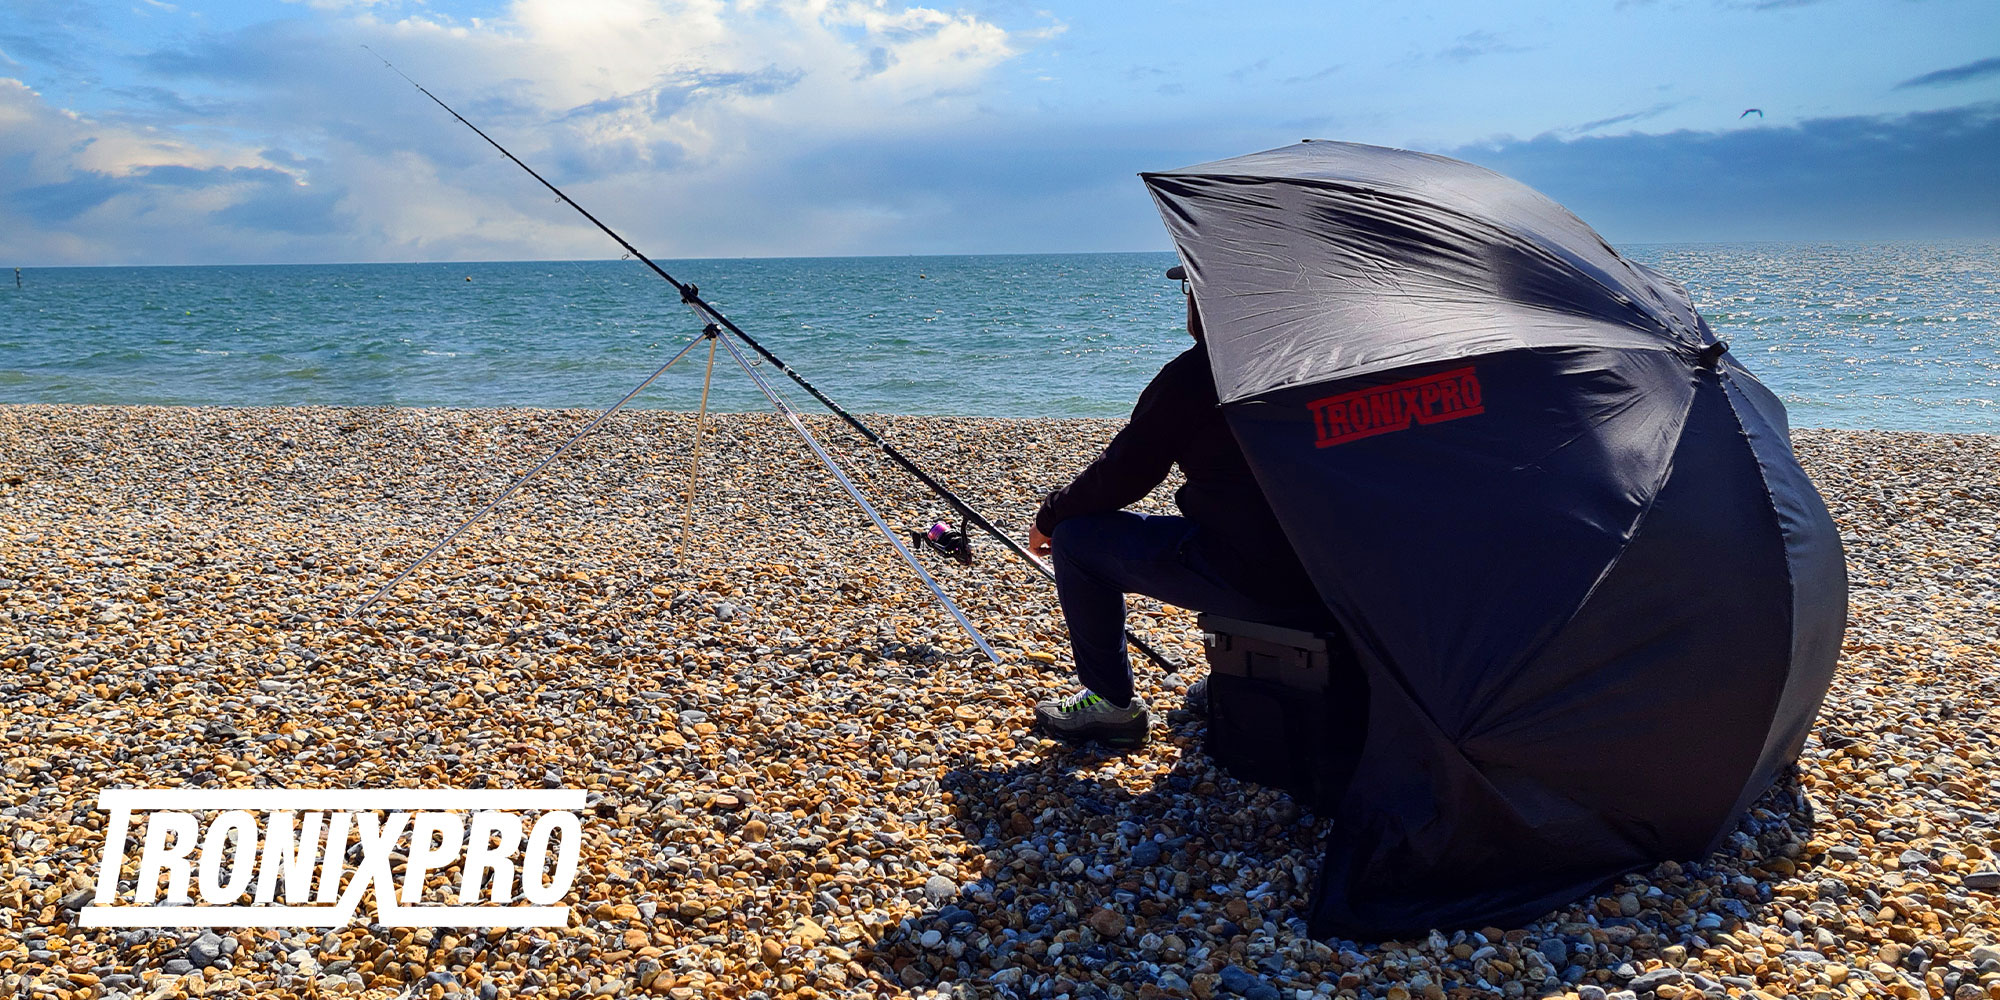 Tronixpro  Premium, affordable sea fishing tackle for anglers